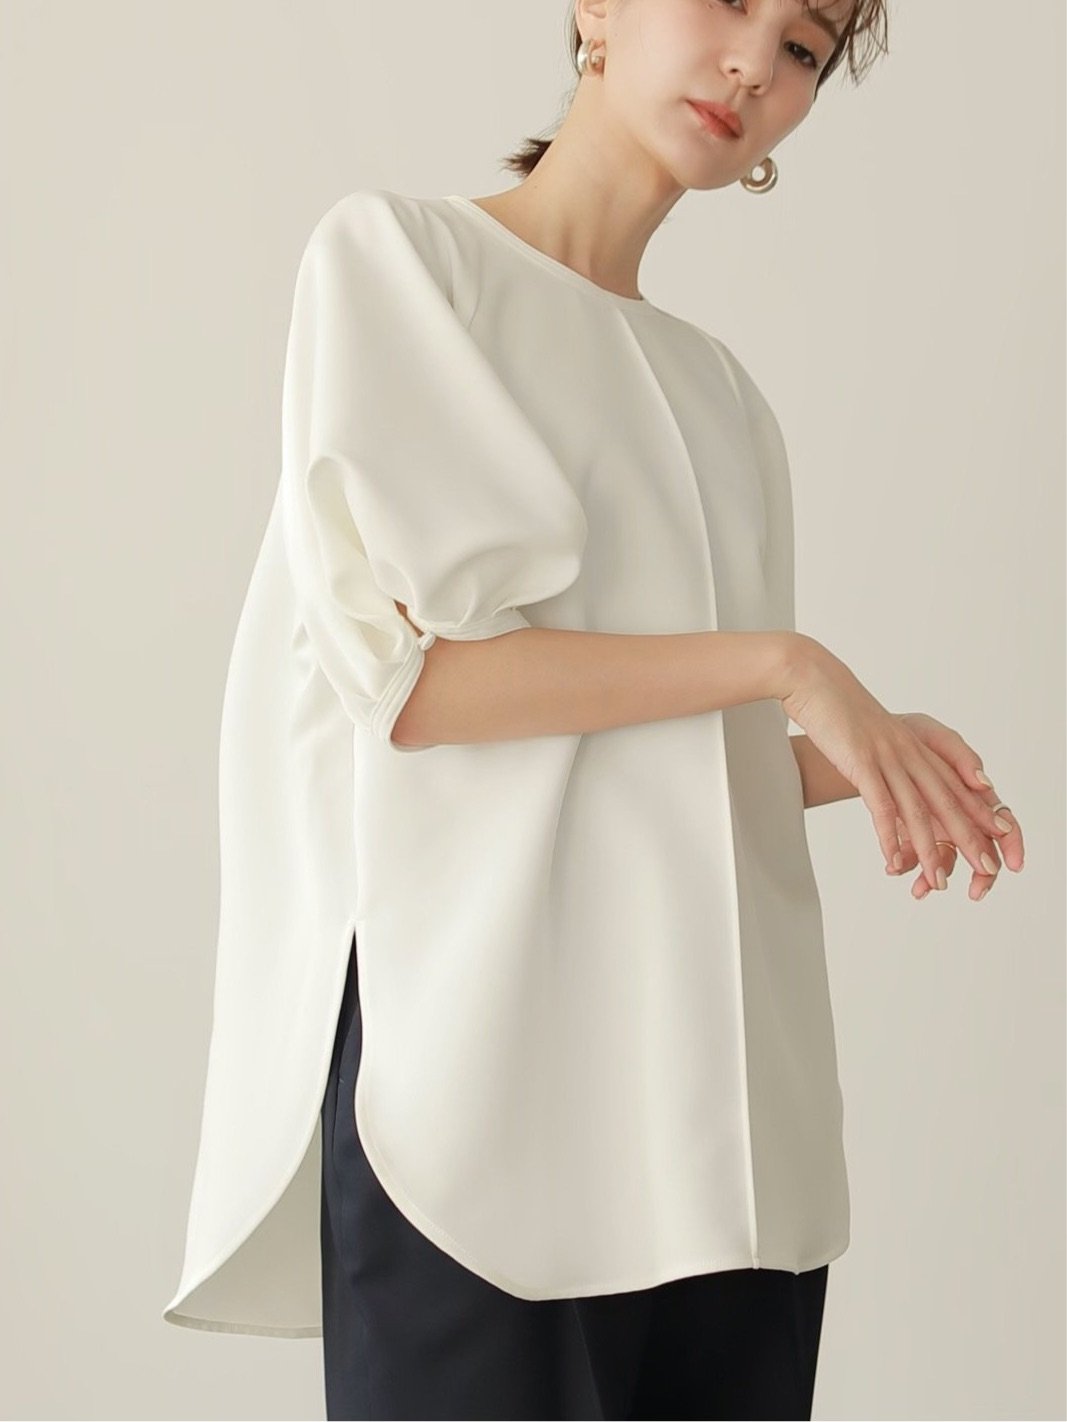 2021 SUMMER COLLECTION vol.1】DRAPE CAPE BLOUSE / PUFF SLEEVE OVER ...